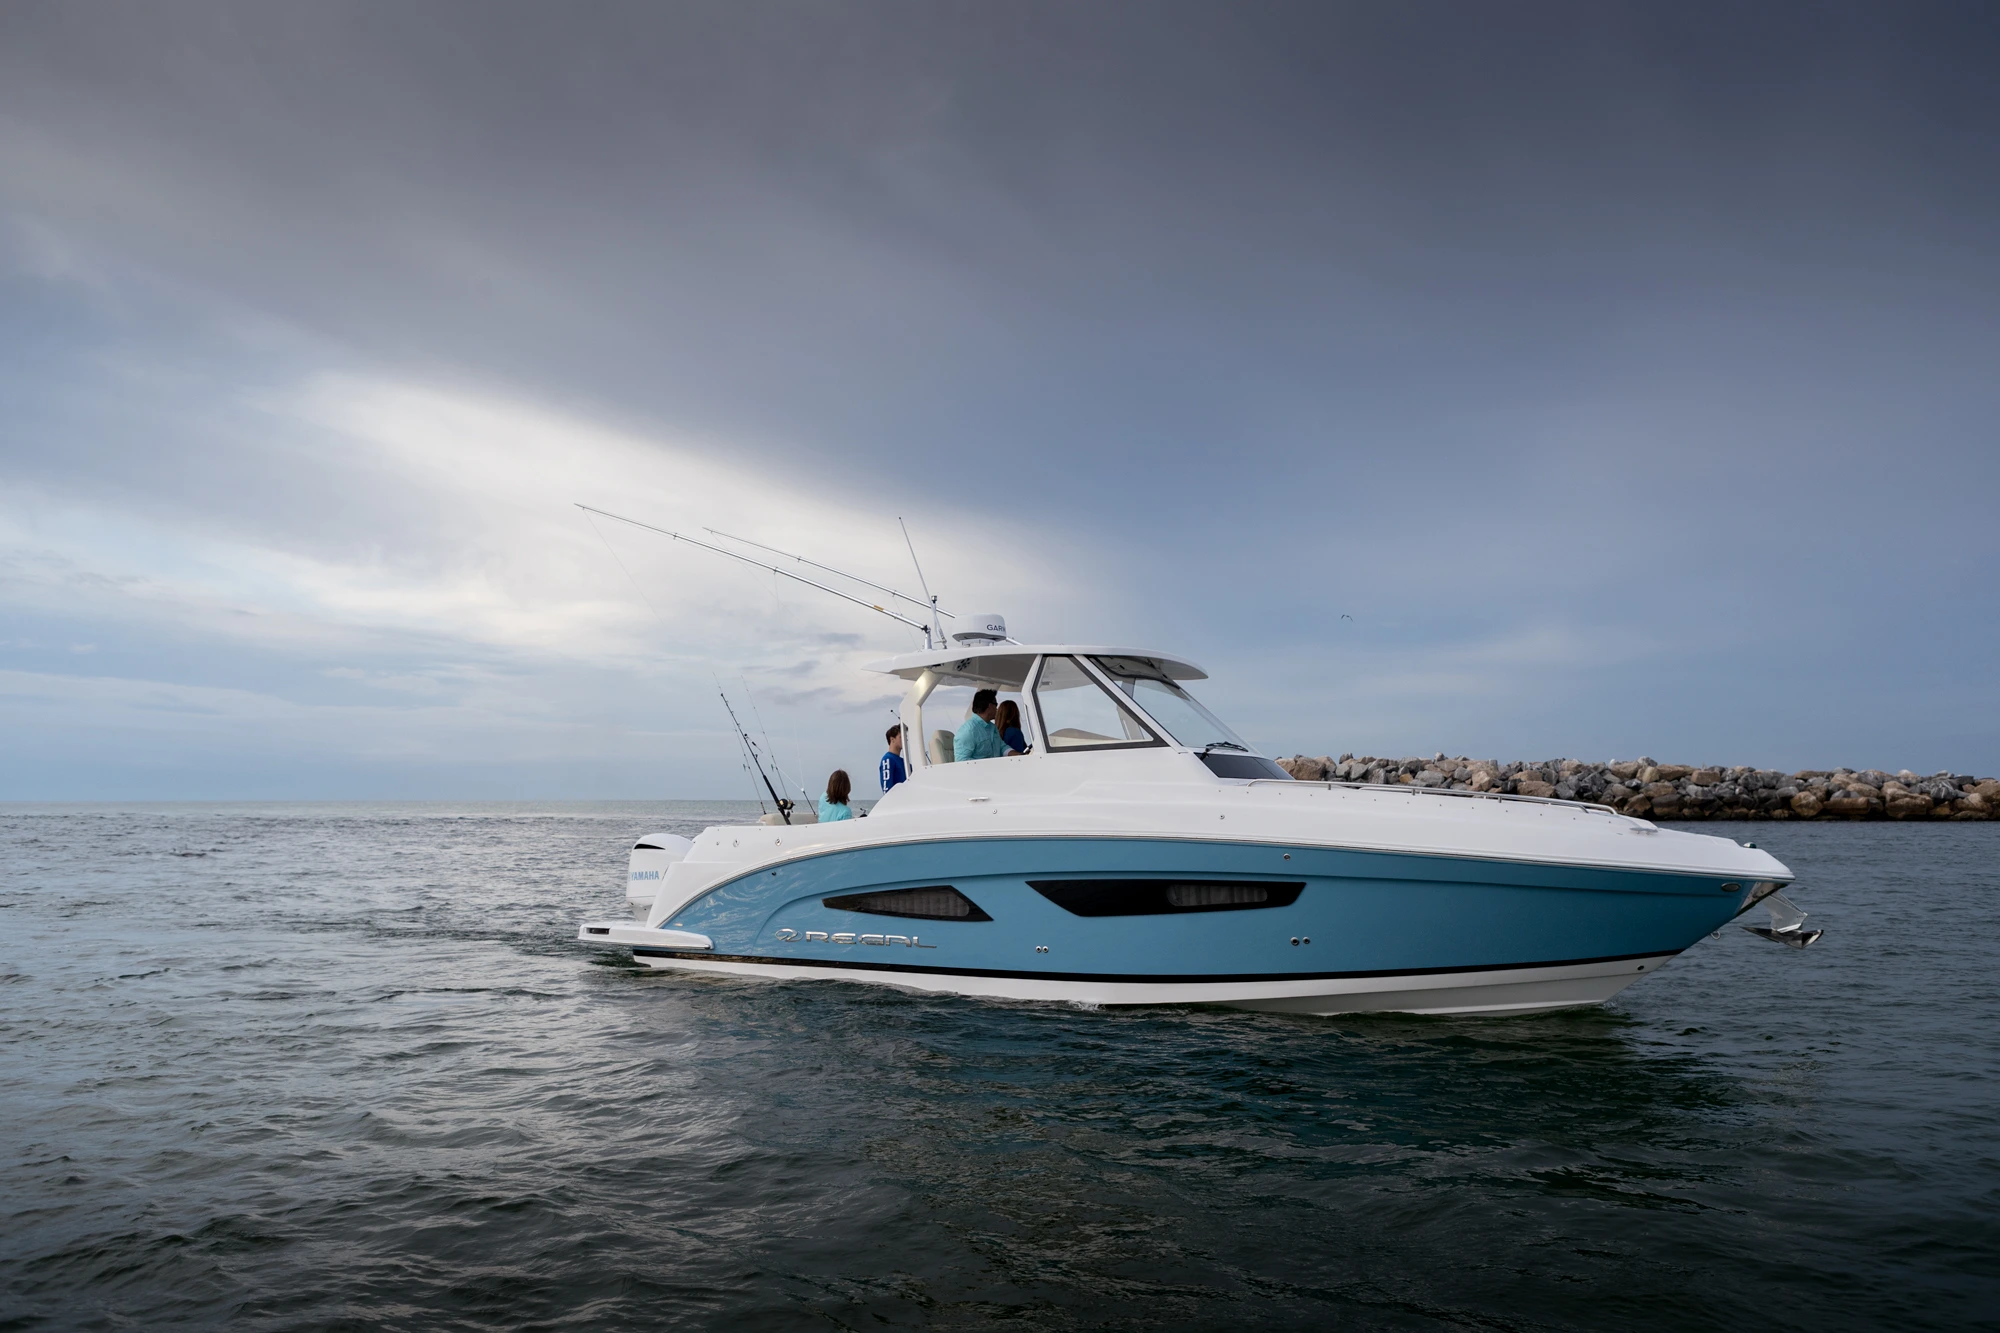 A sleek and stylish 33-foot boat cruising through calm blue waters.